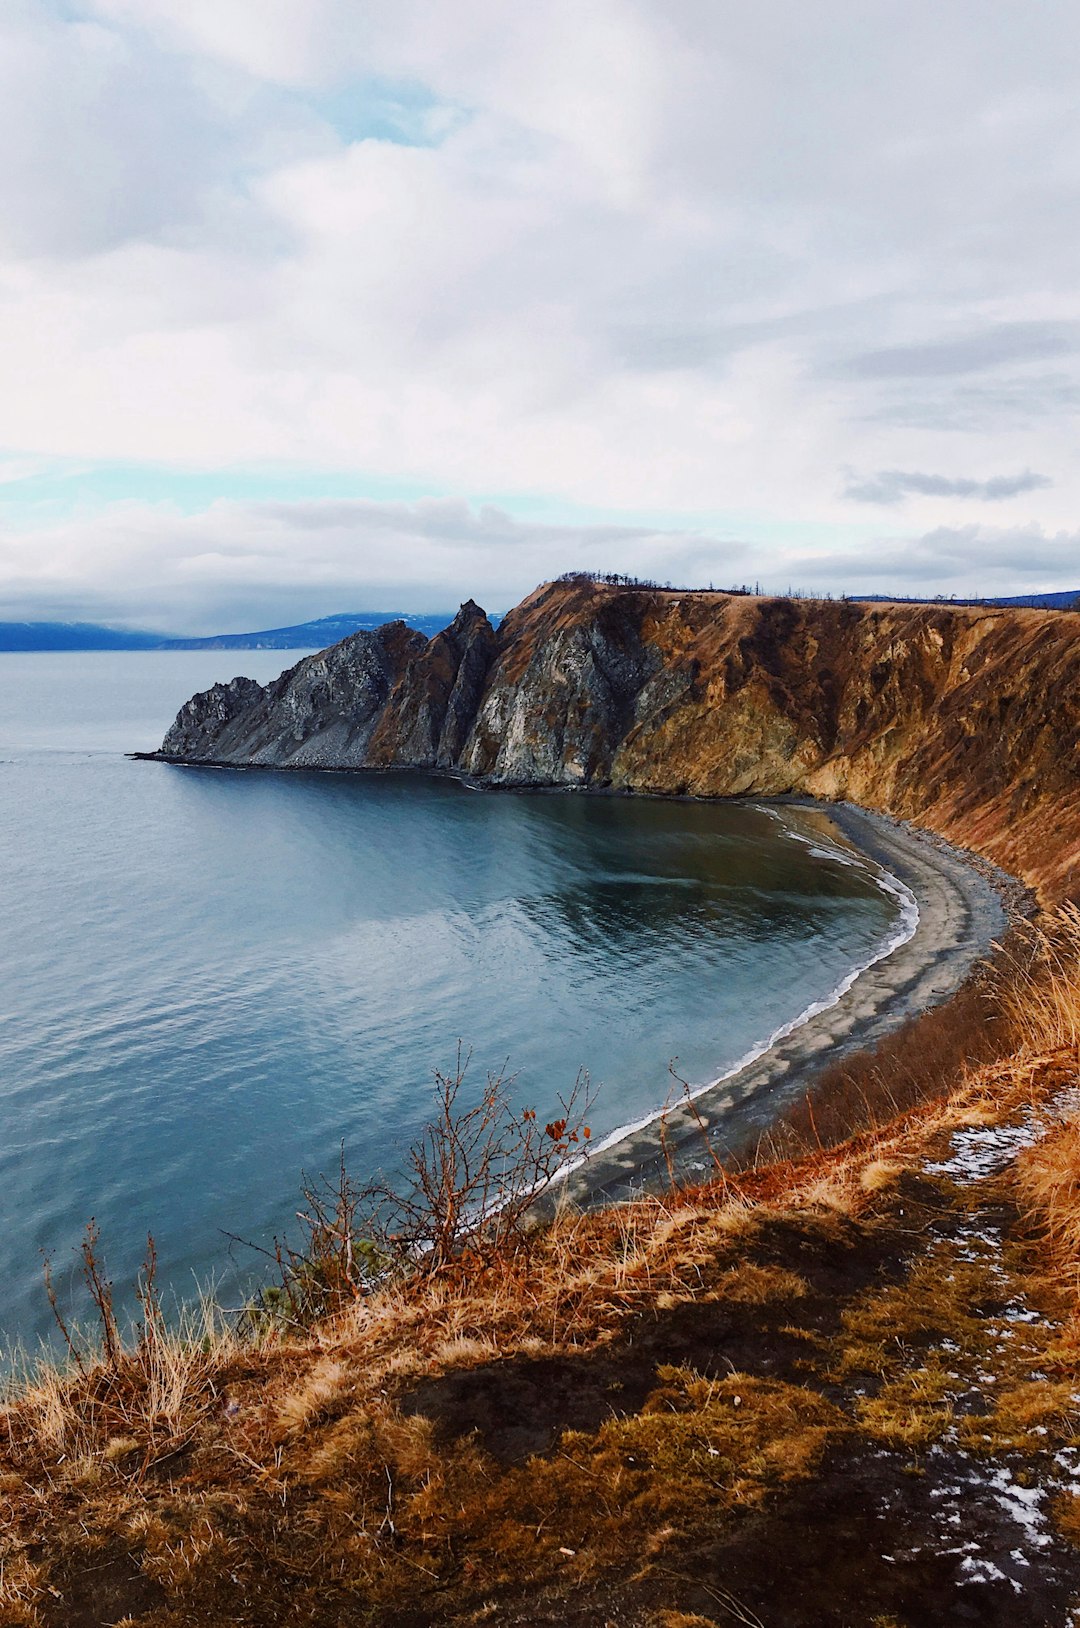 travelers stories about Cliff in cape "Nyuklya", Russia